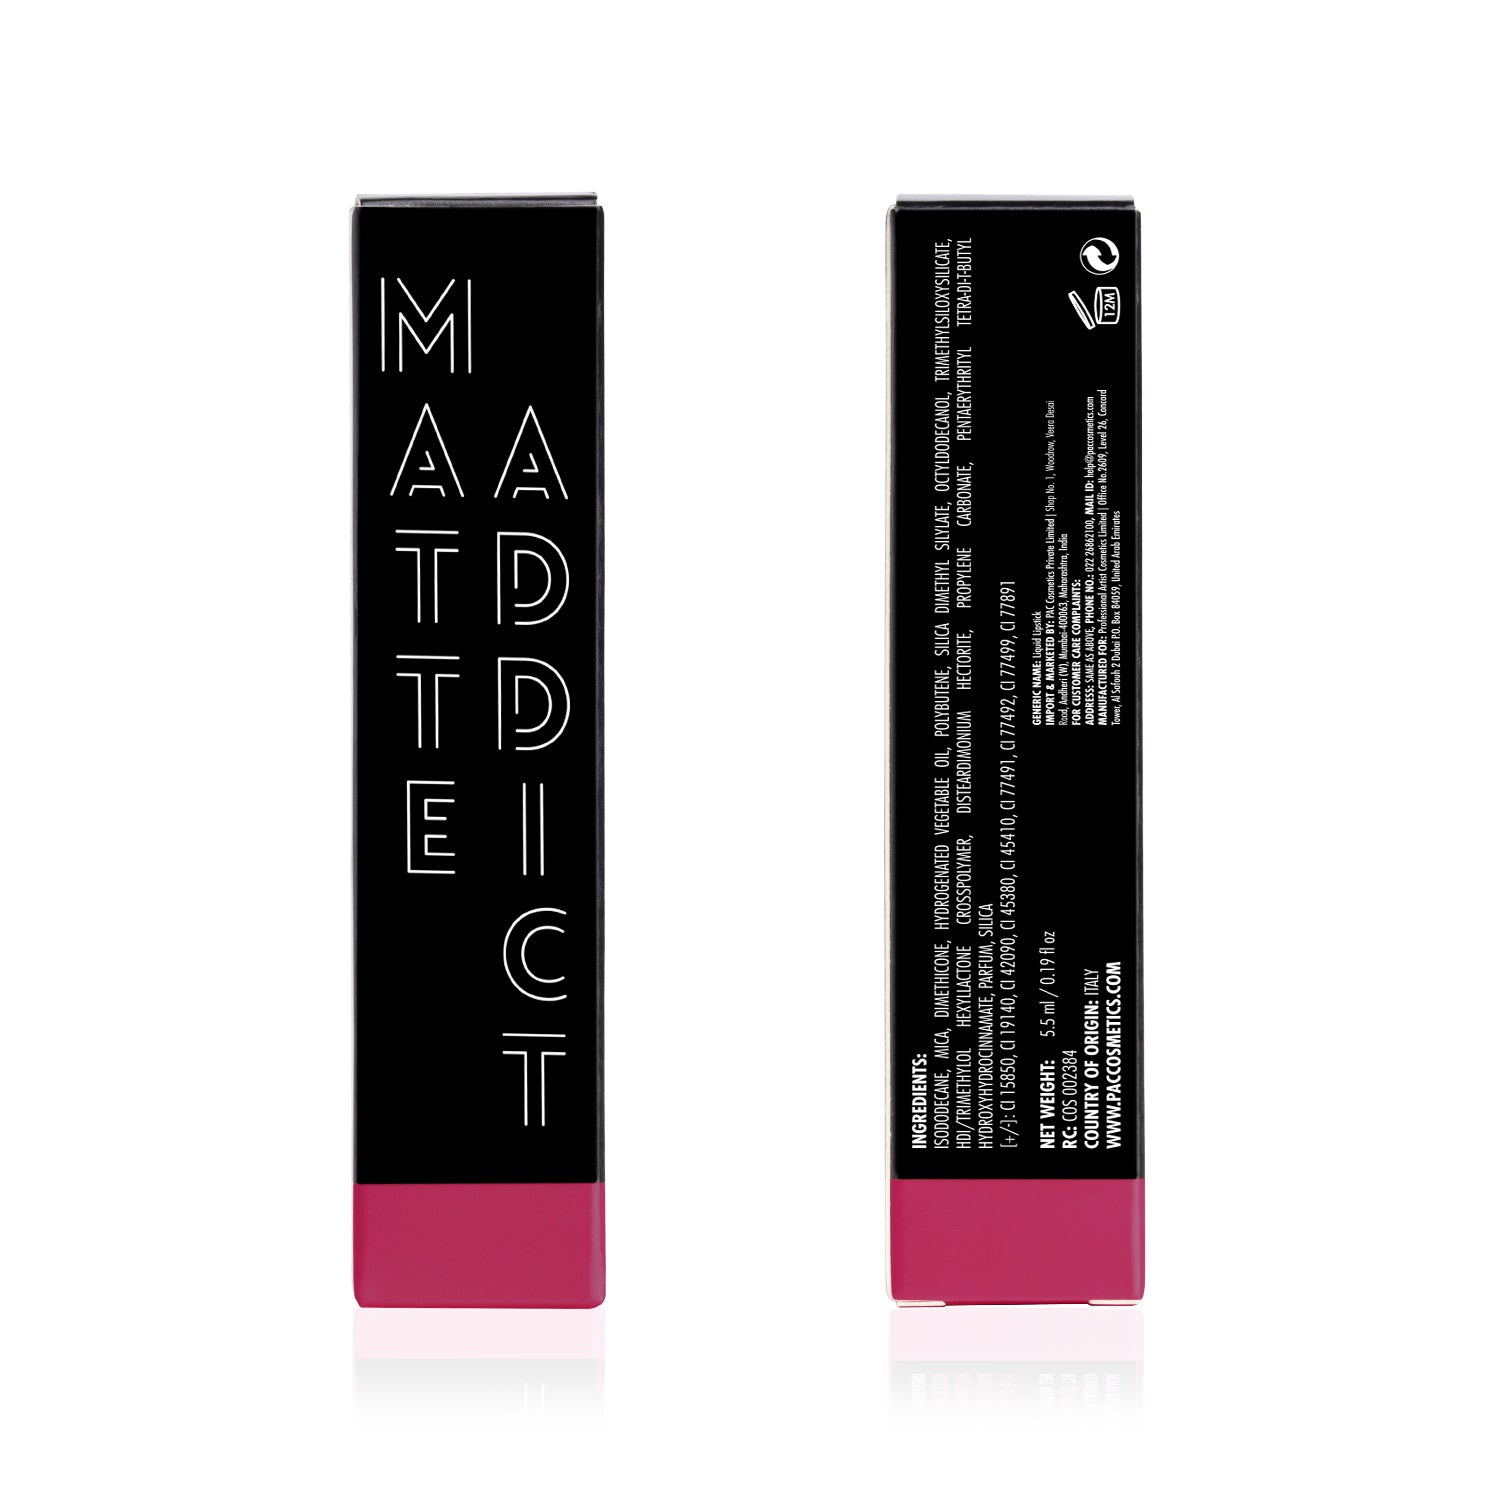 PAC Cosmetics Matte Addict #Size_5.5 ml+#Color_Cherry On Top